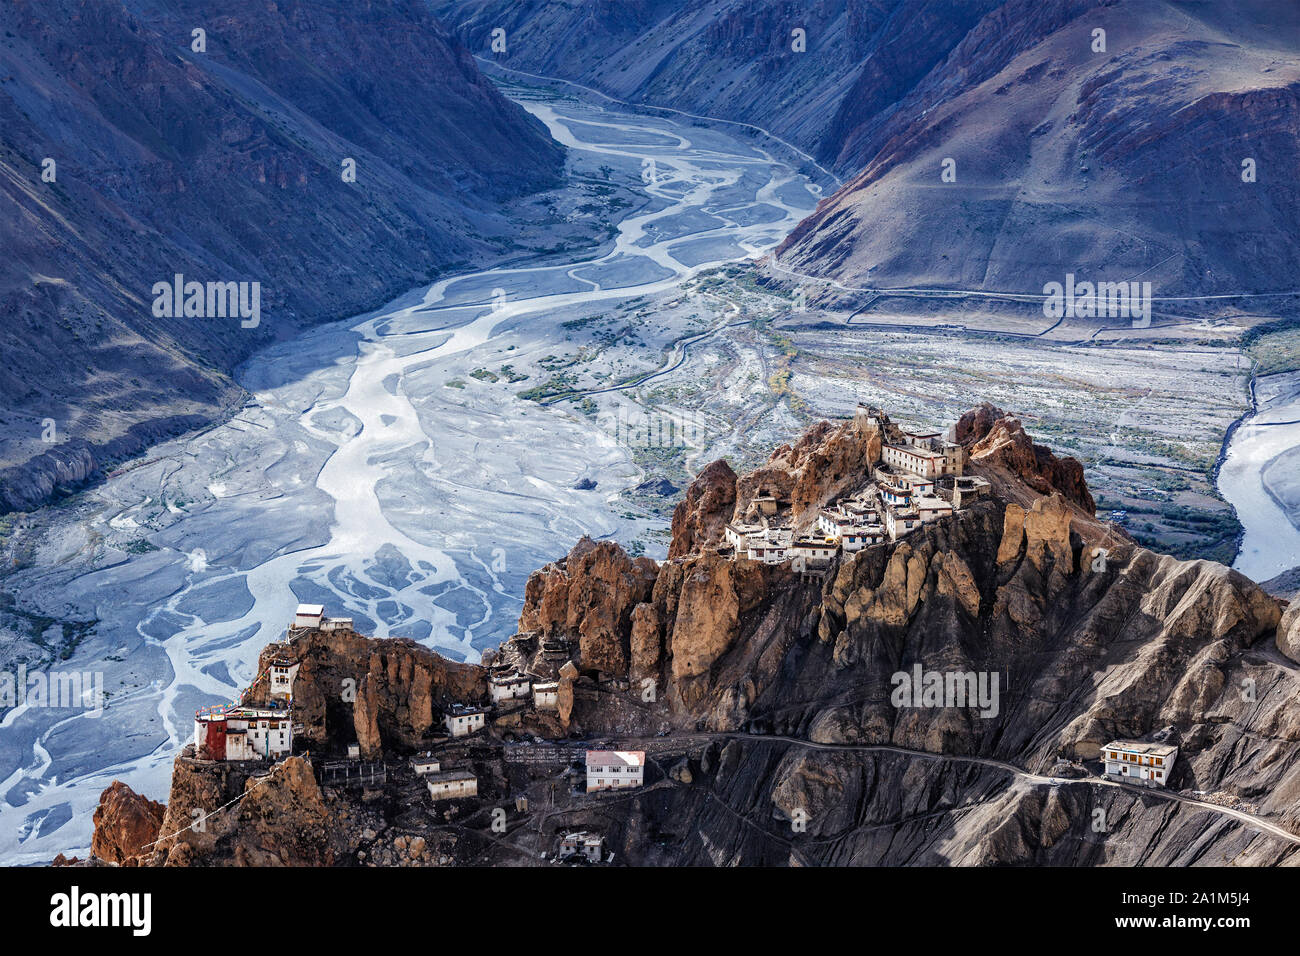 Dhankar monastry perched on a cliff in Himalayas, India Stock Photo